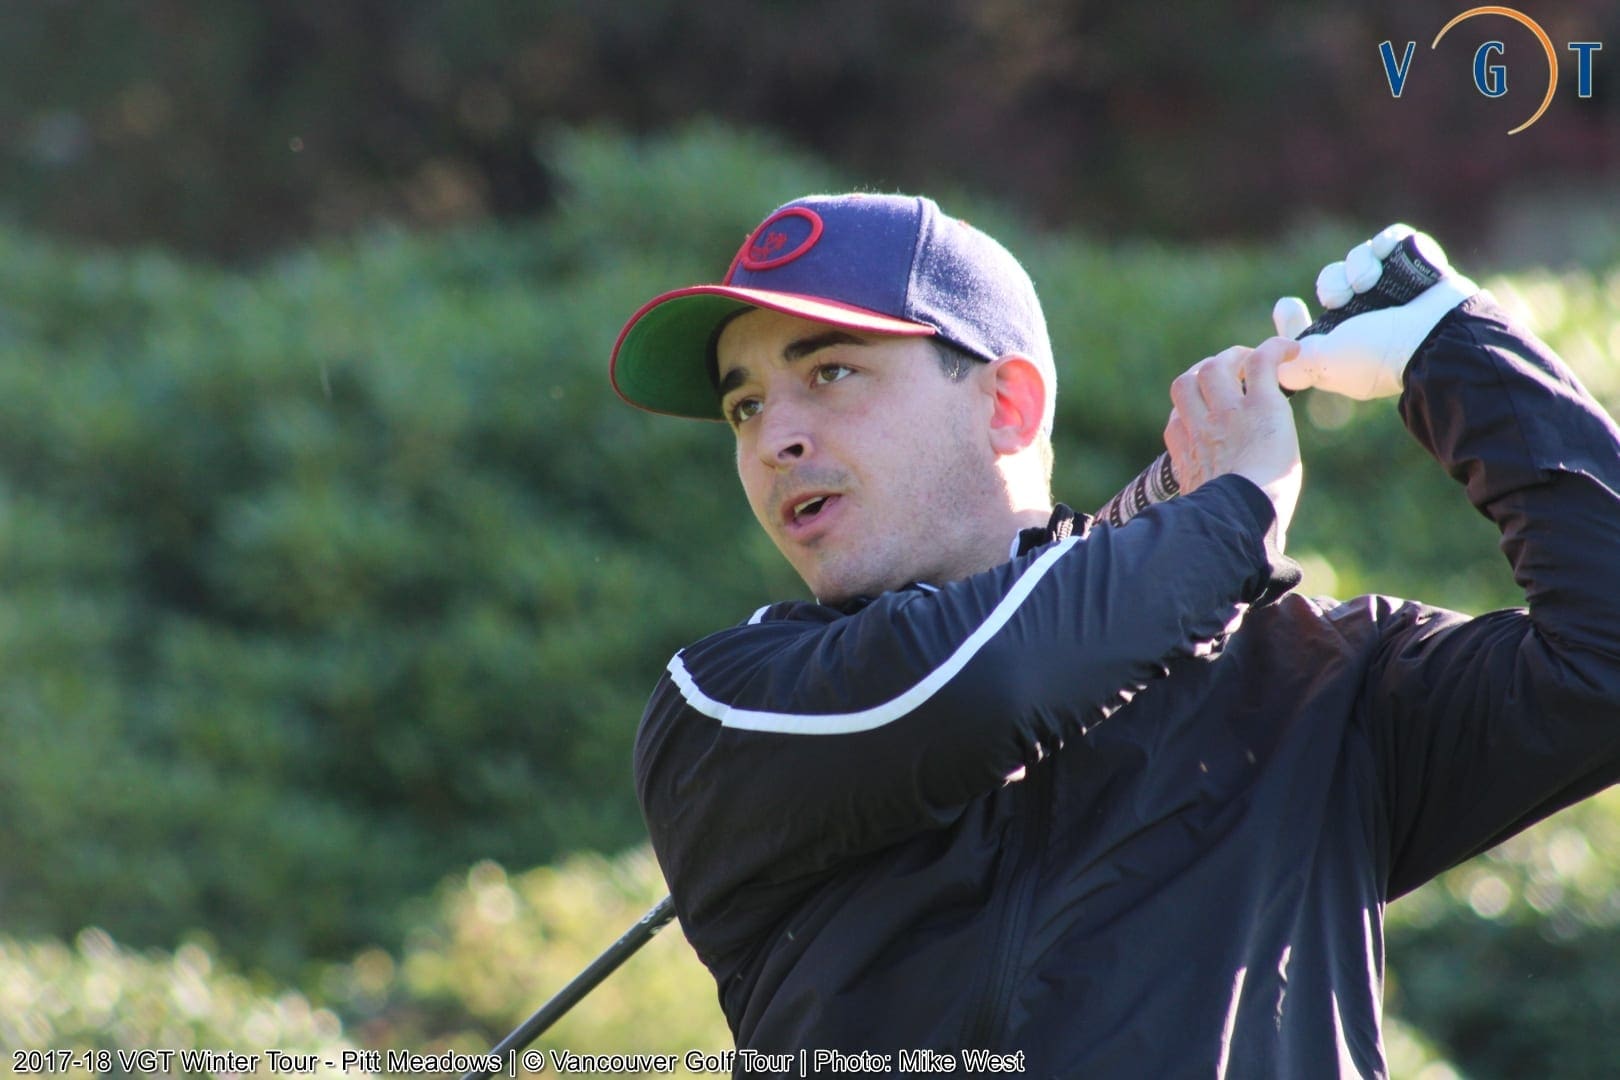 Lamb Wins Ledgeview with Another Round of 66 (-4) | Vancouver Golf Tour ...